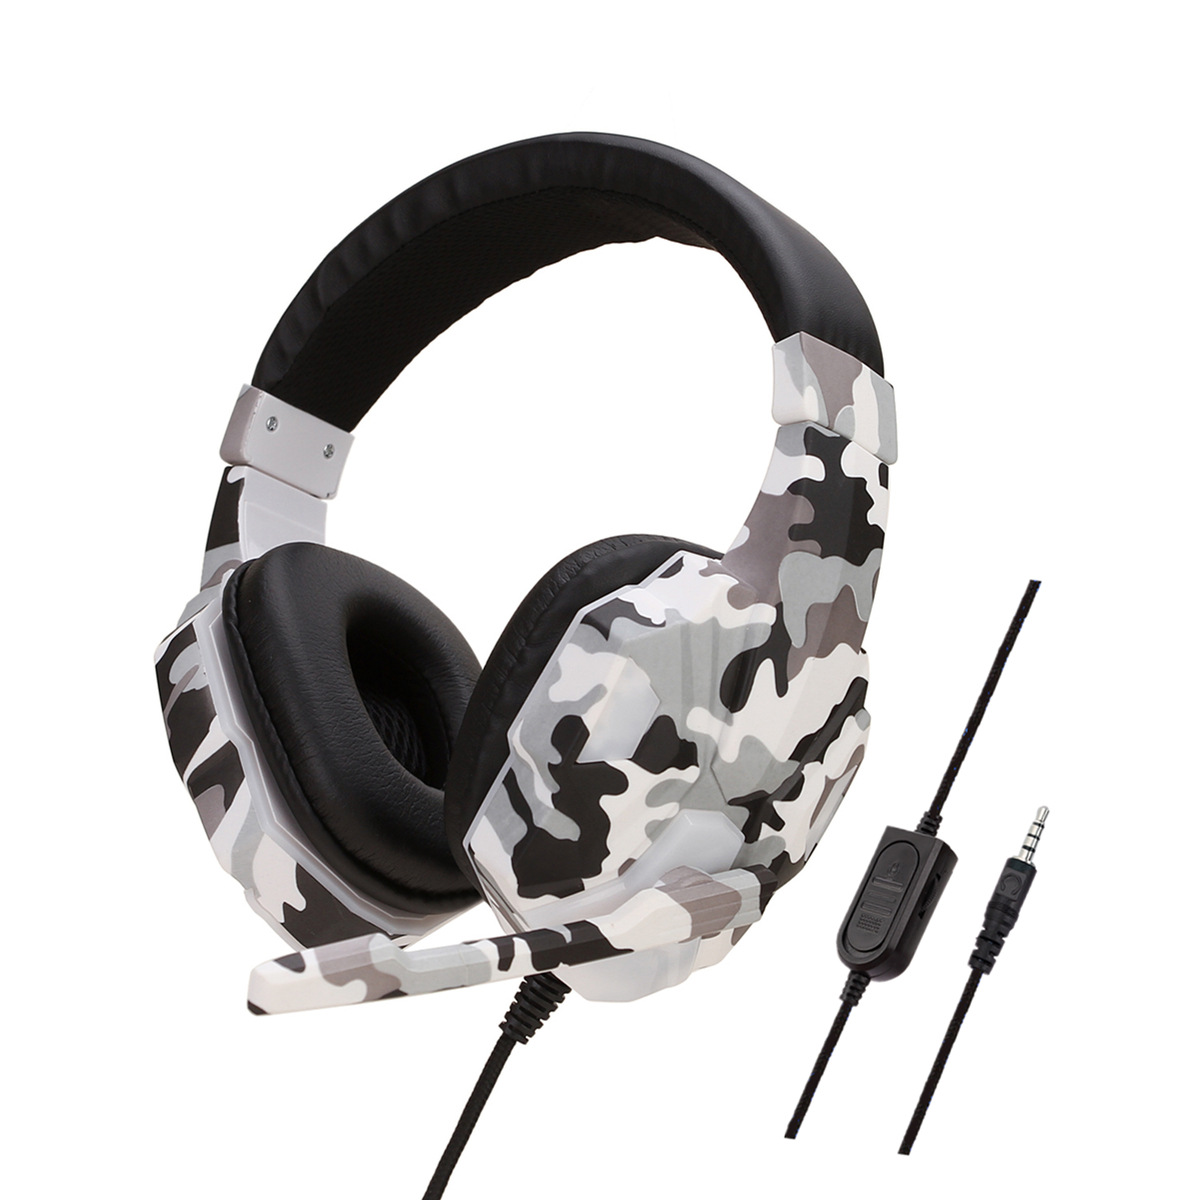 Earphone Gaming Headset Camouflage Headphones with Microphone for PC Laptop Camouflage Gray PS4 Edition